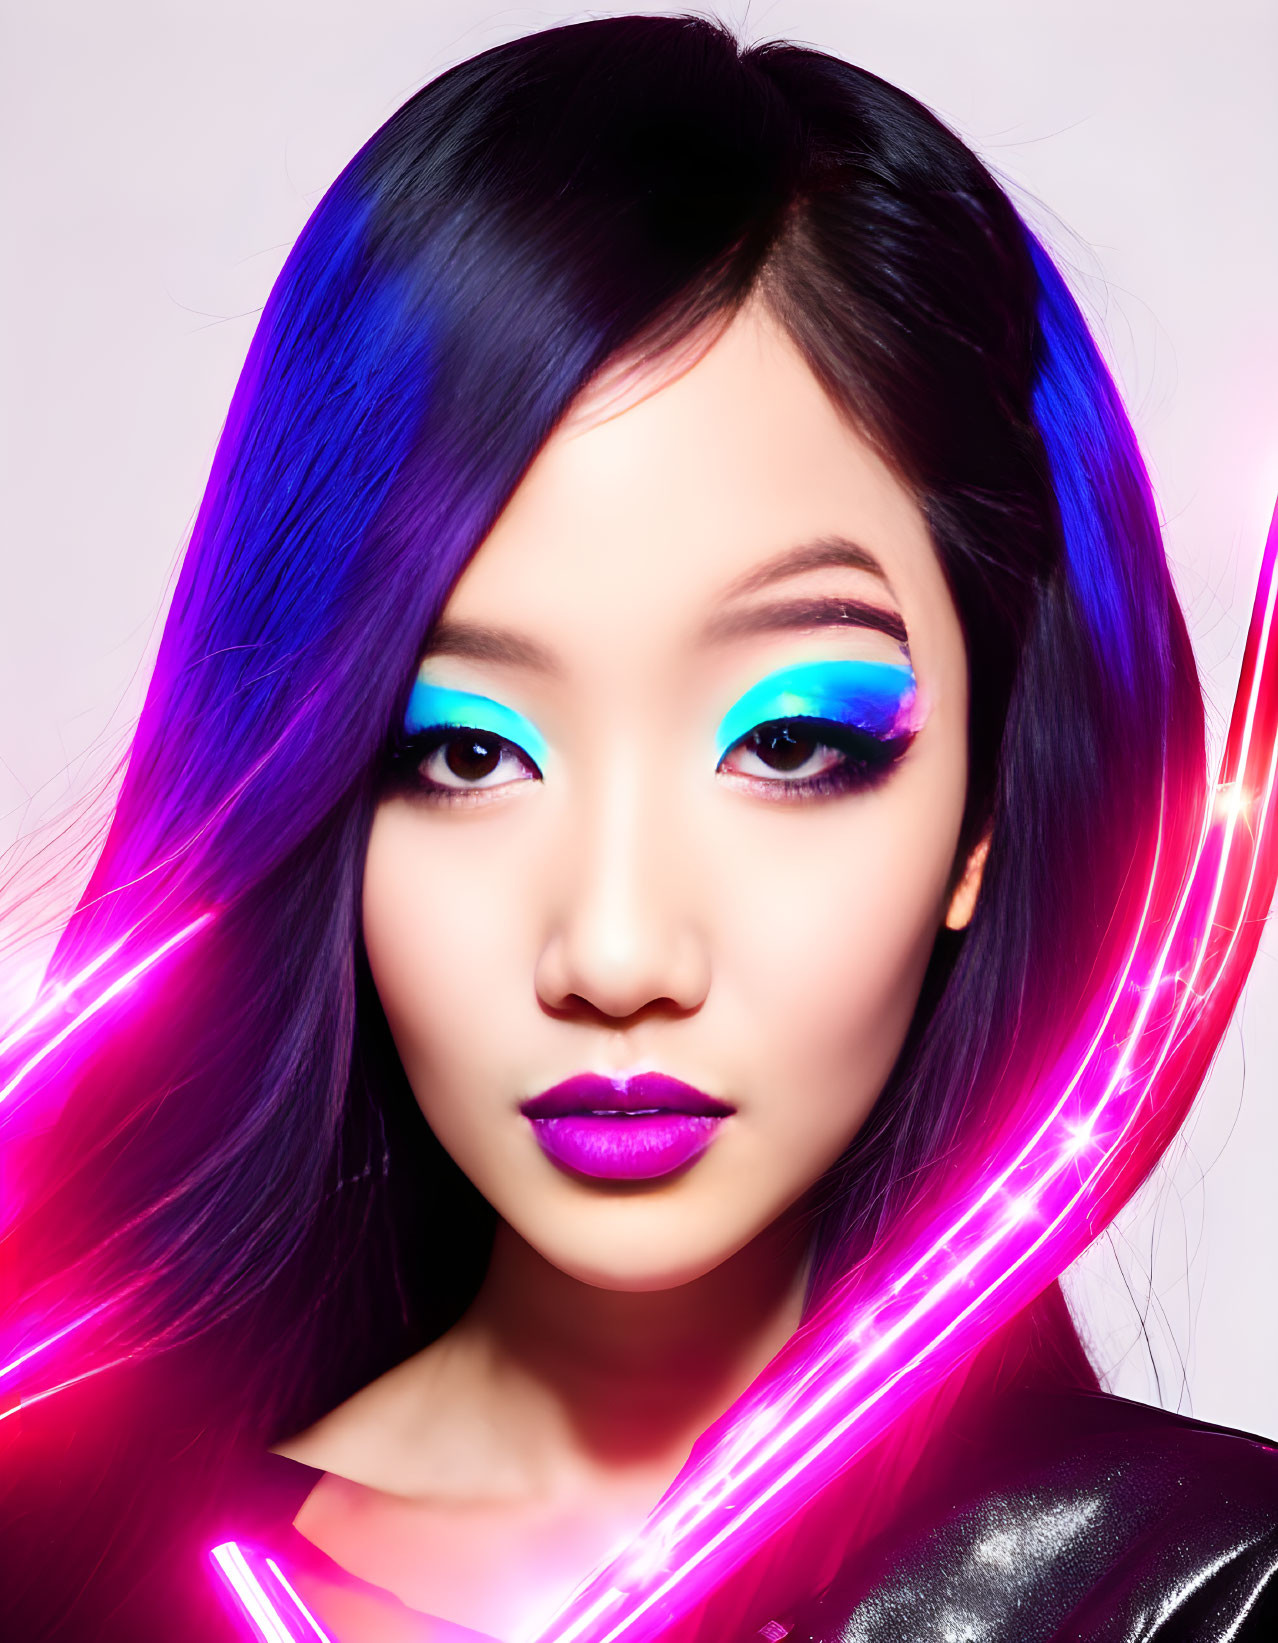 Woman with Bright Blue Eyeshadow and Purple Lipstick in Neon Pink Light Streaks